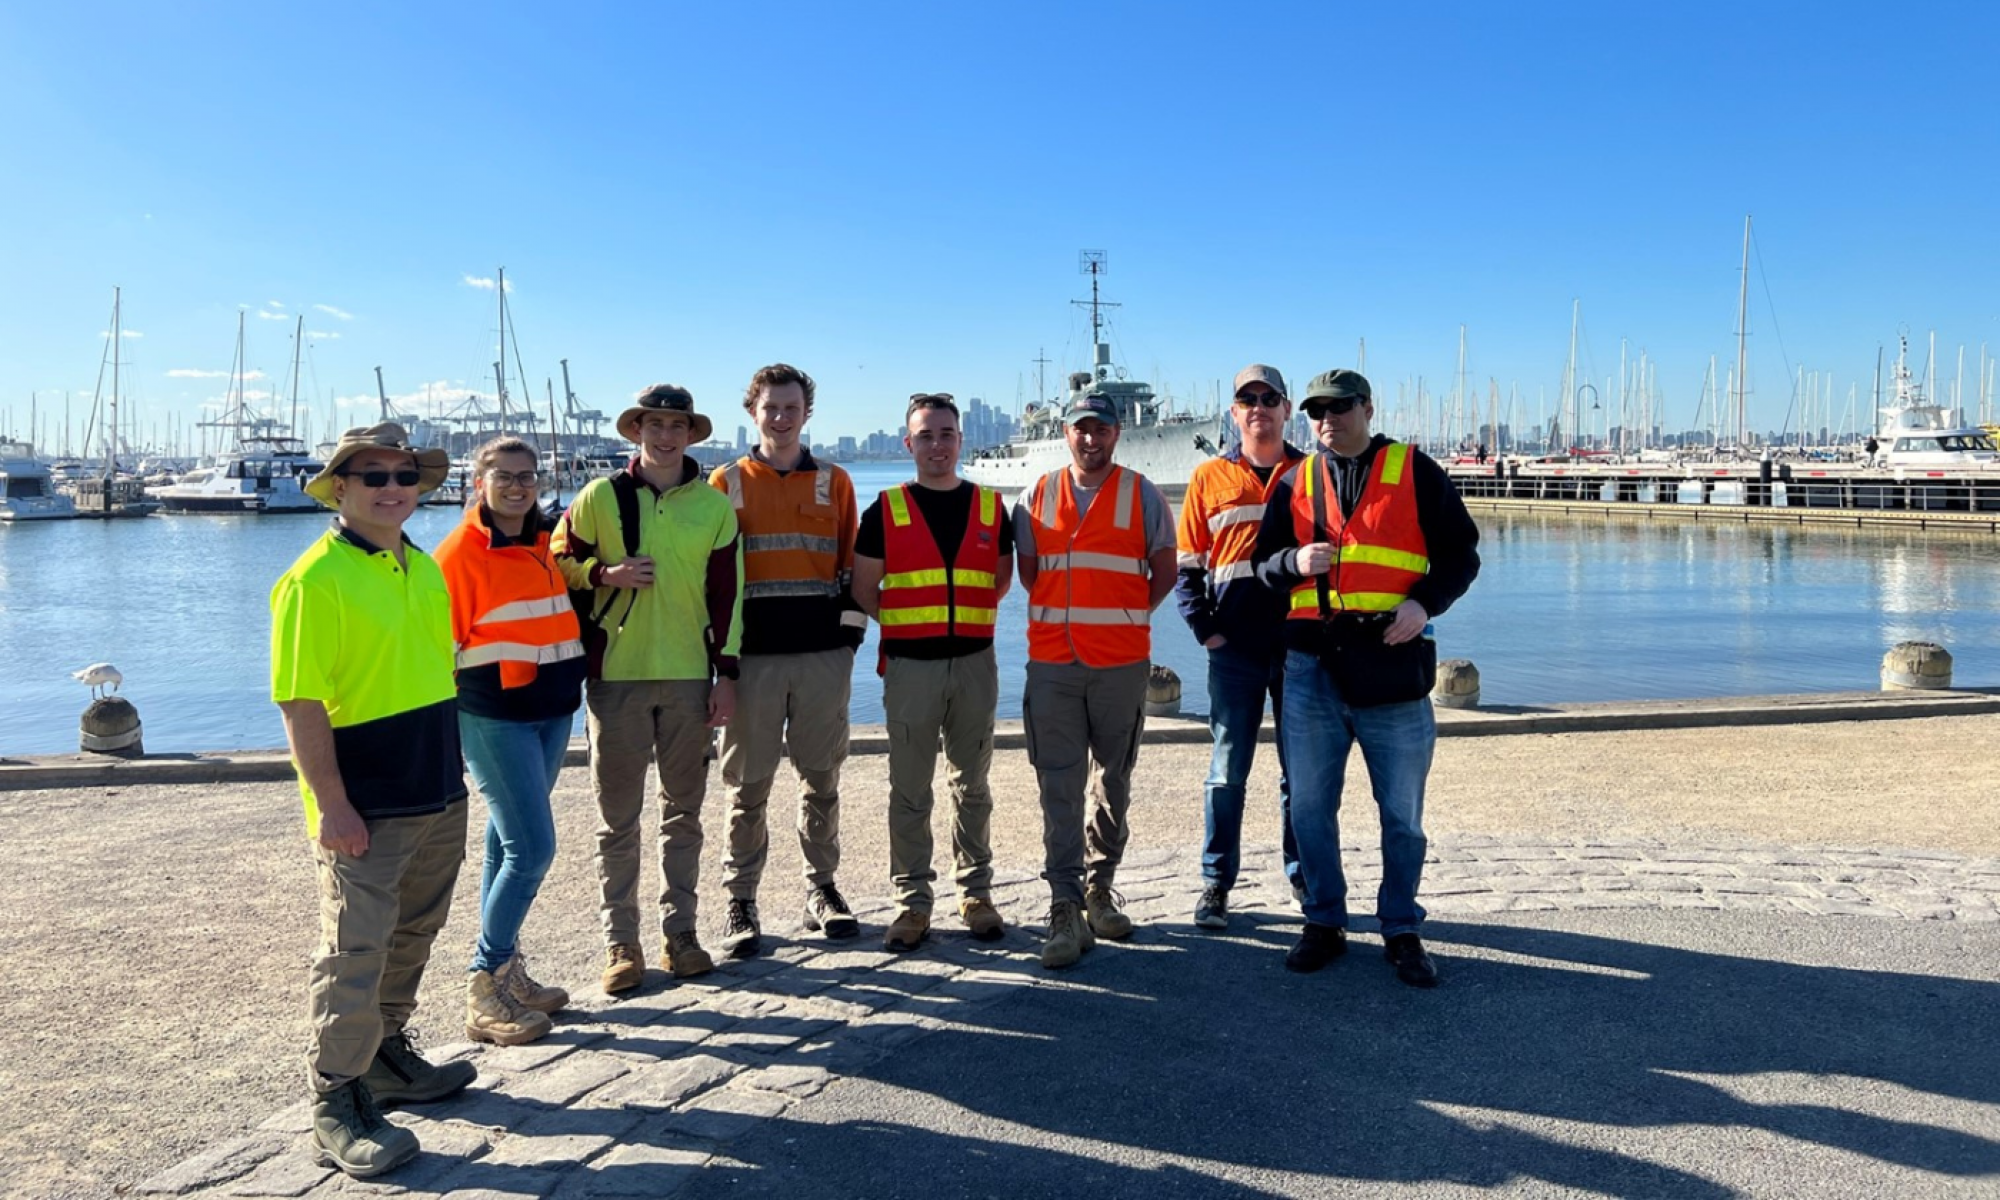 DCM staff standing in front of boats docked at Hobsons Bay